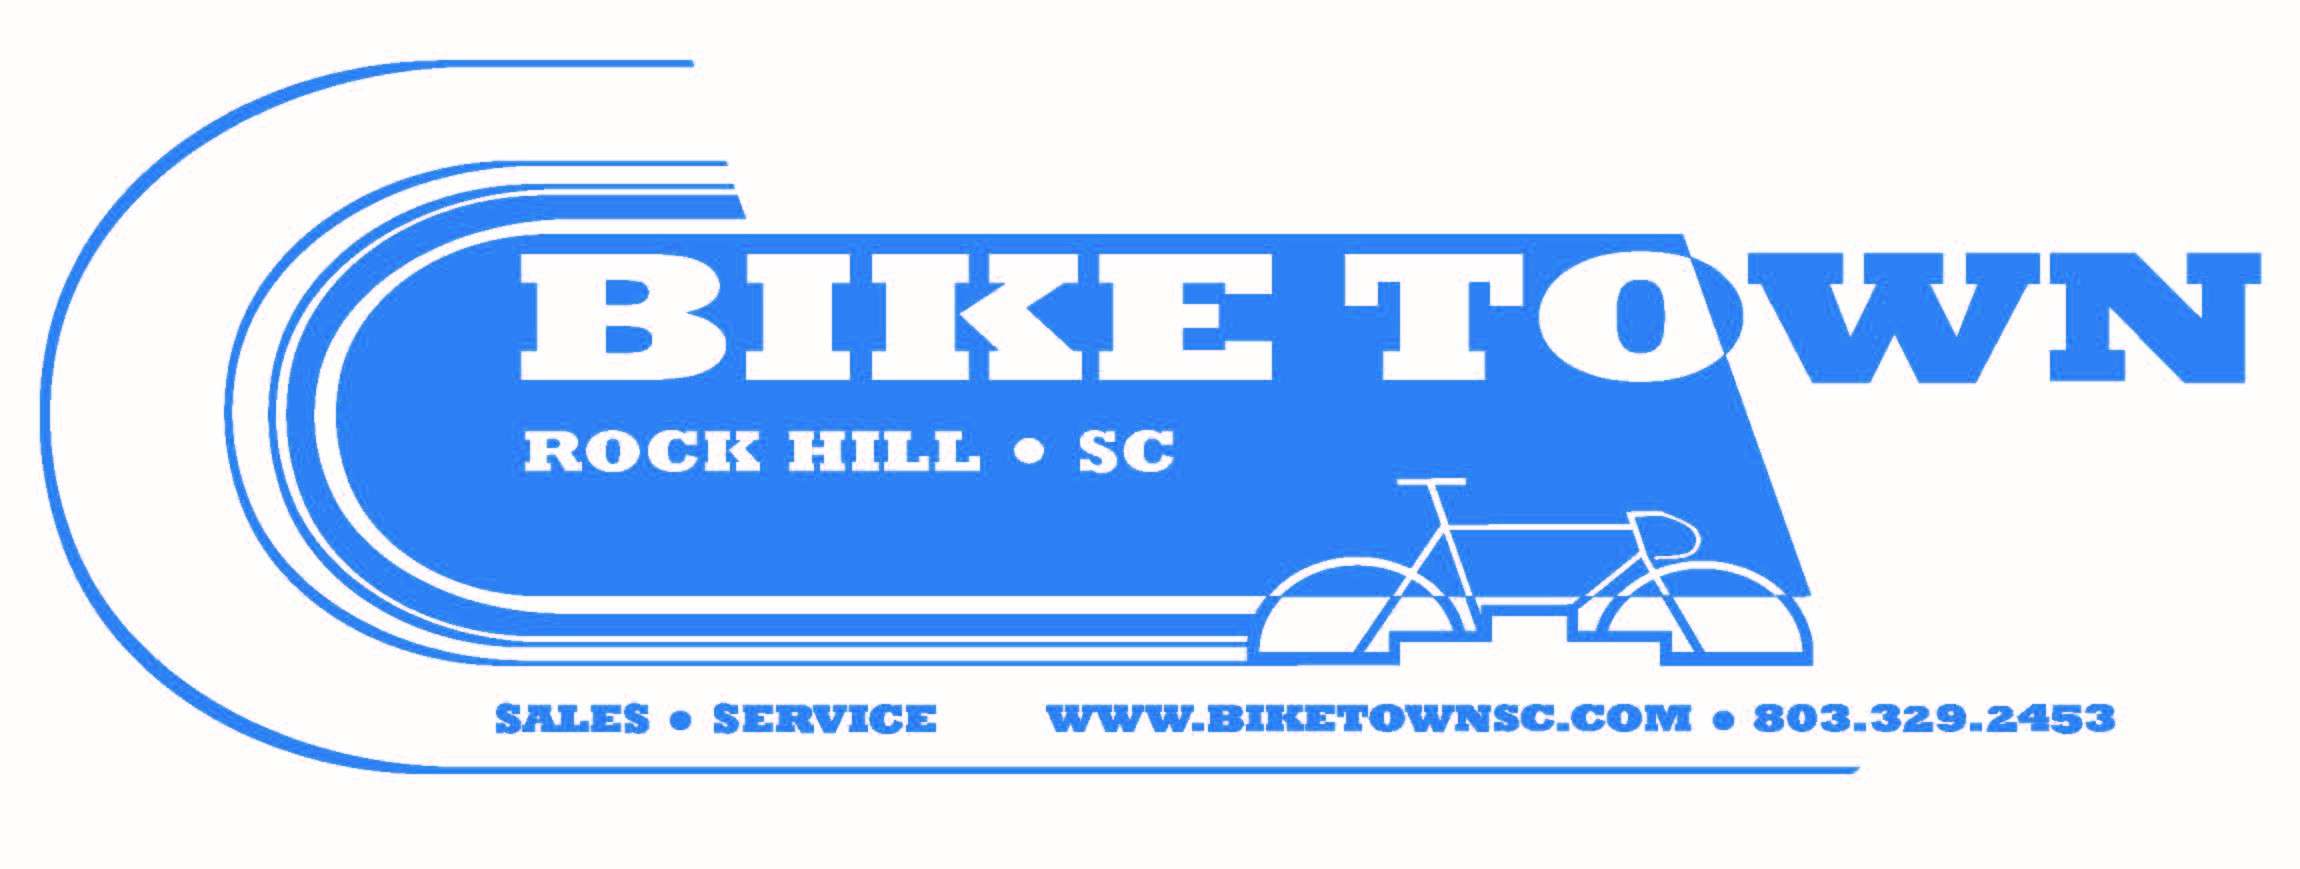 Bike Town Home Page